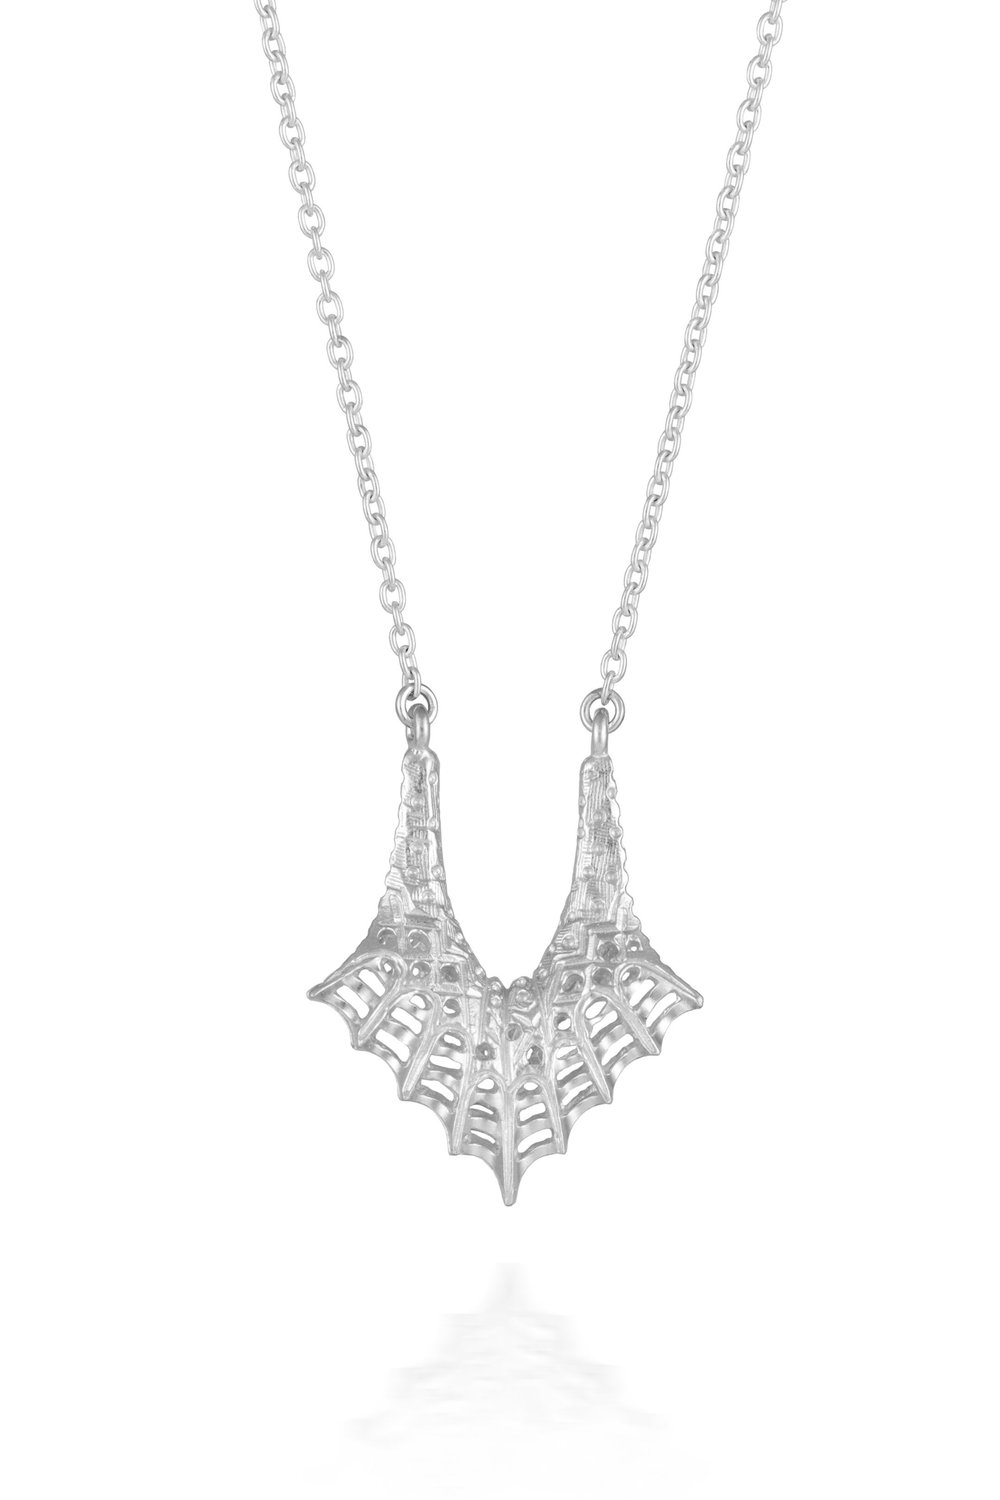 Silver ring holder necklace with lace detail from the Oppenwark Collection handmade in Shetland by Karlin Anderson Jewellery Design